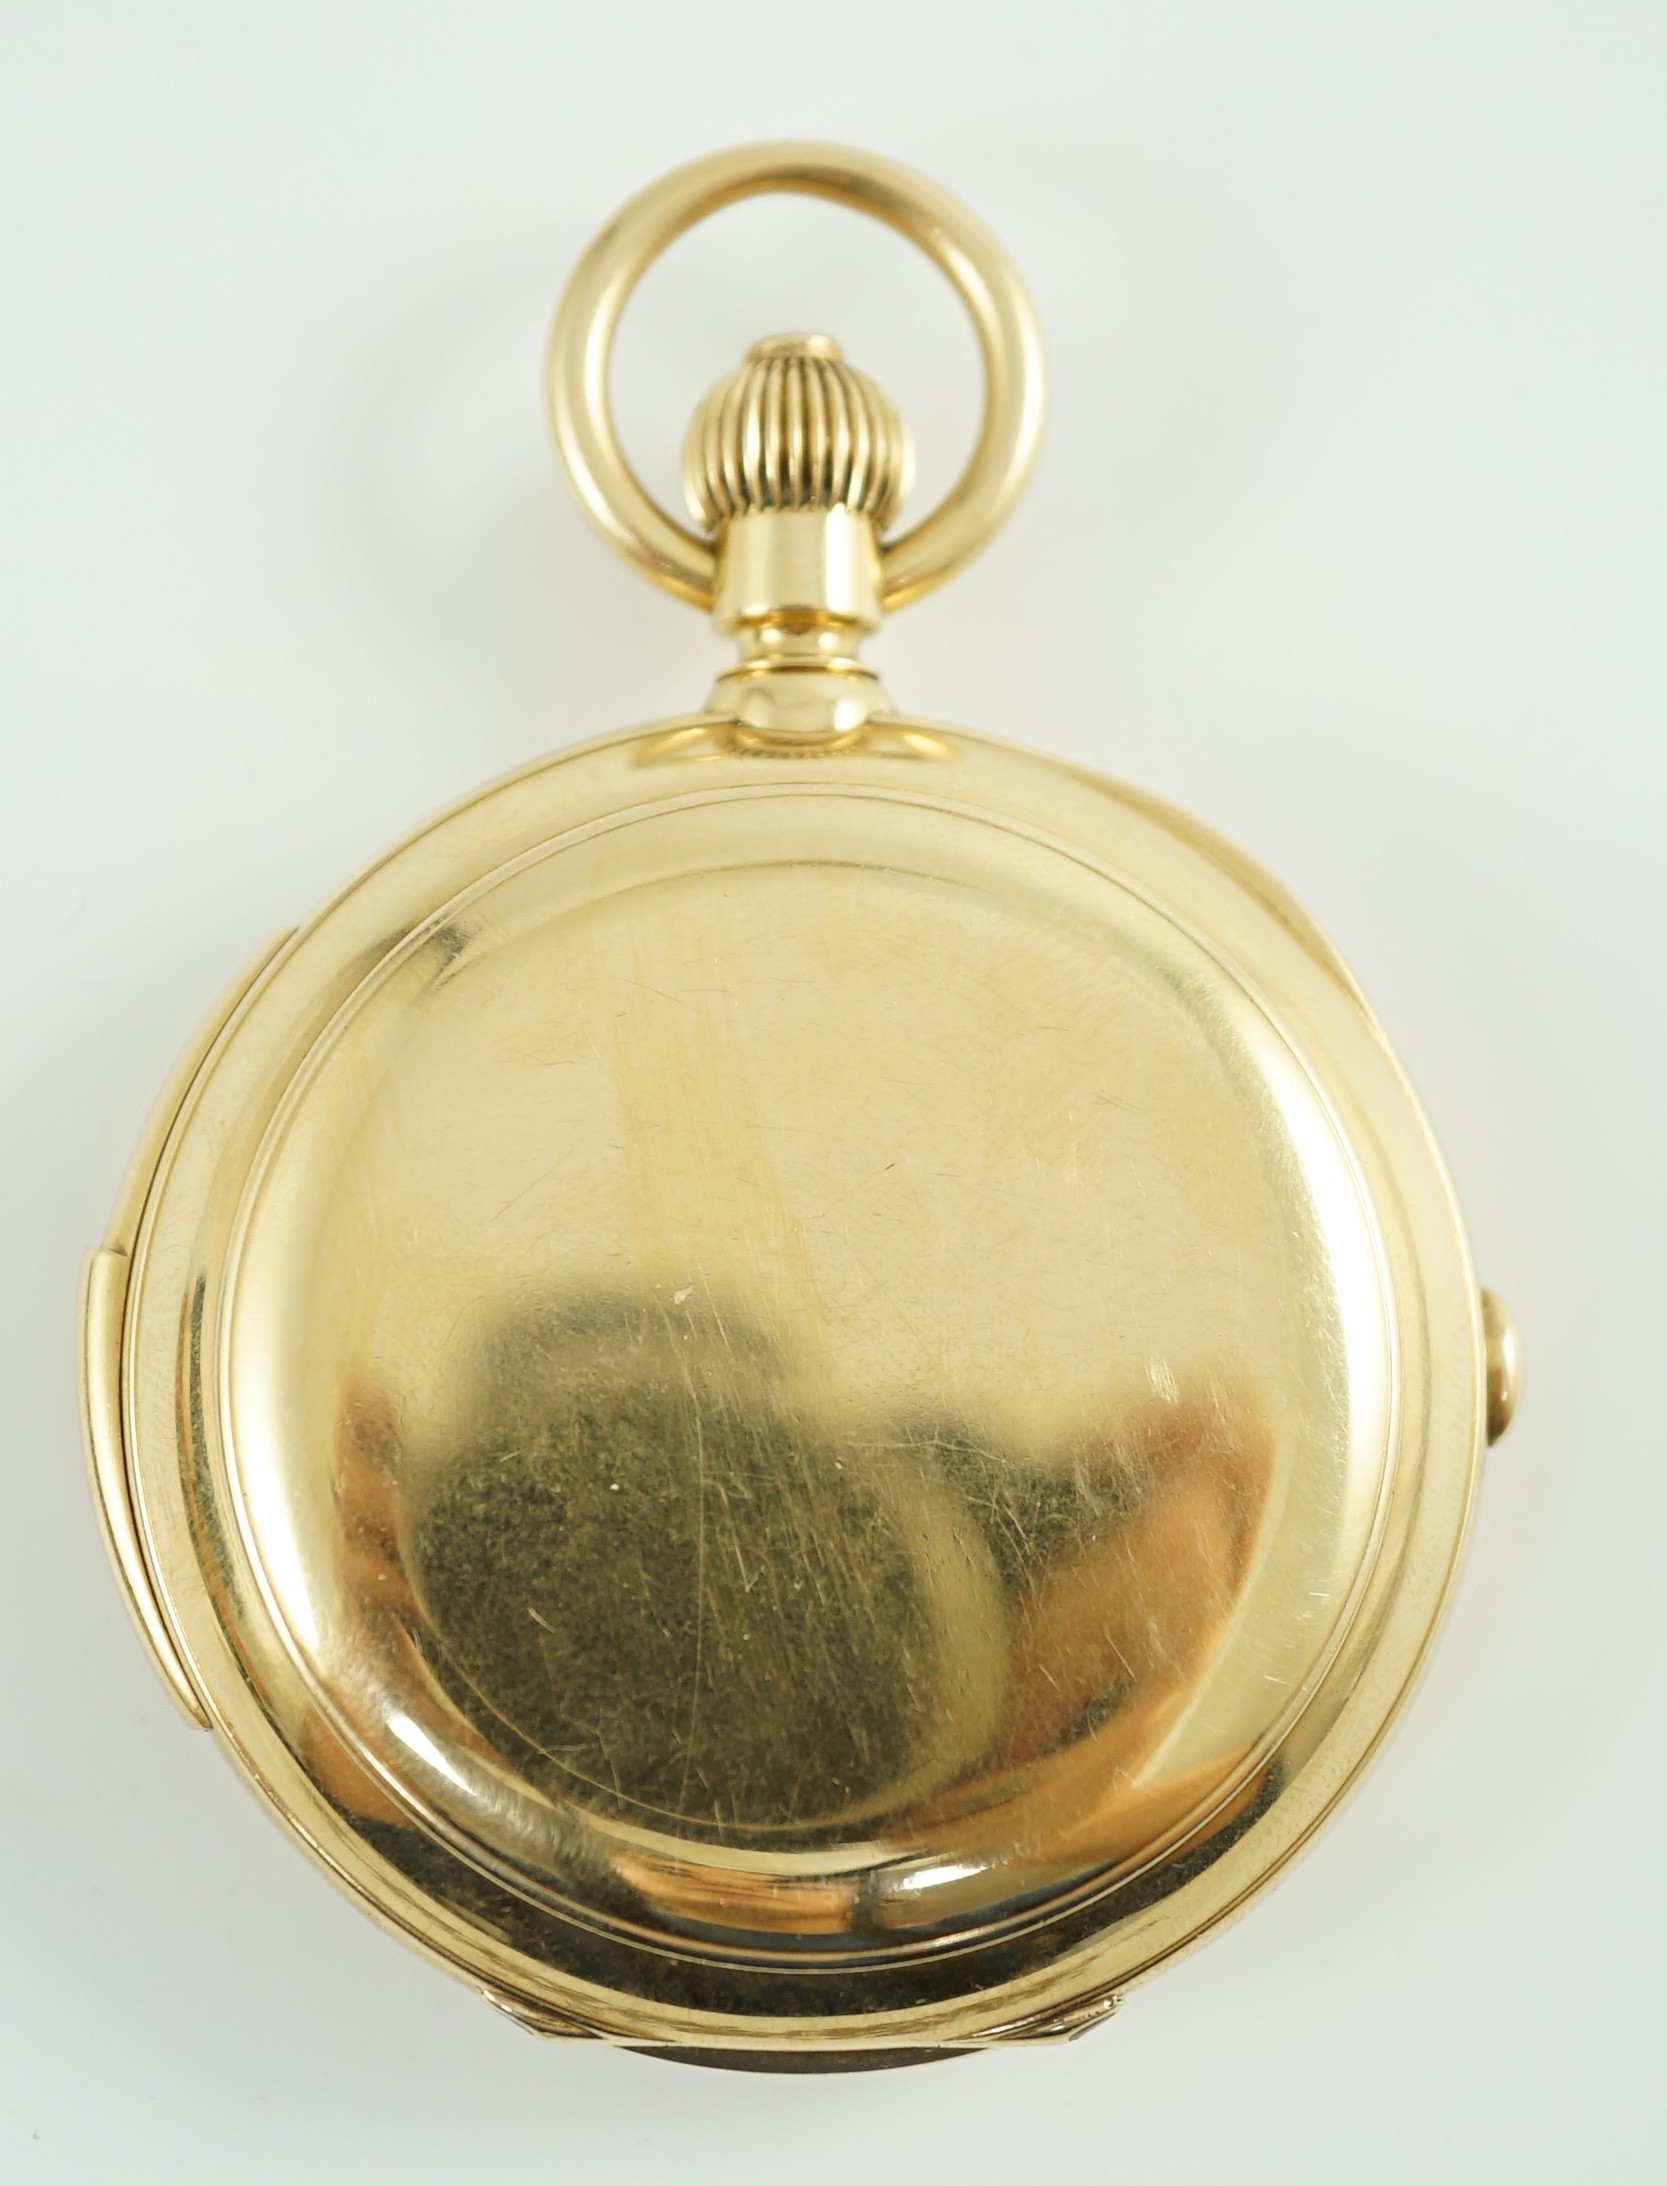 A late 19th Swiss 18k gold keyless hunter minute repeating chronograph pocket watch by U. Montandon Robert